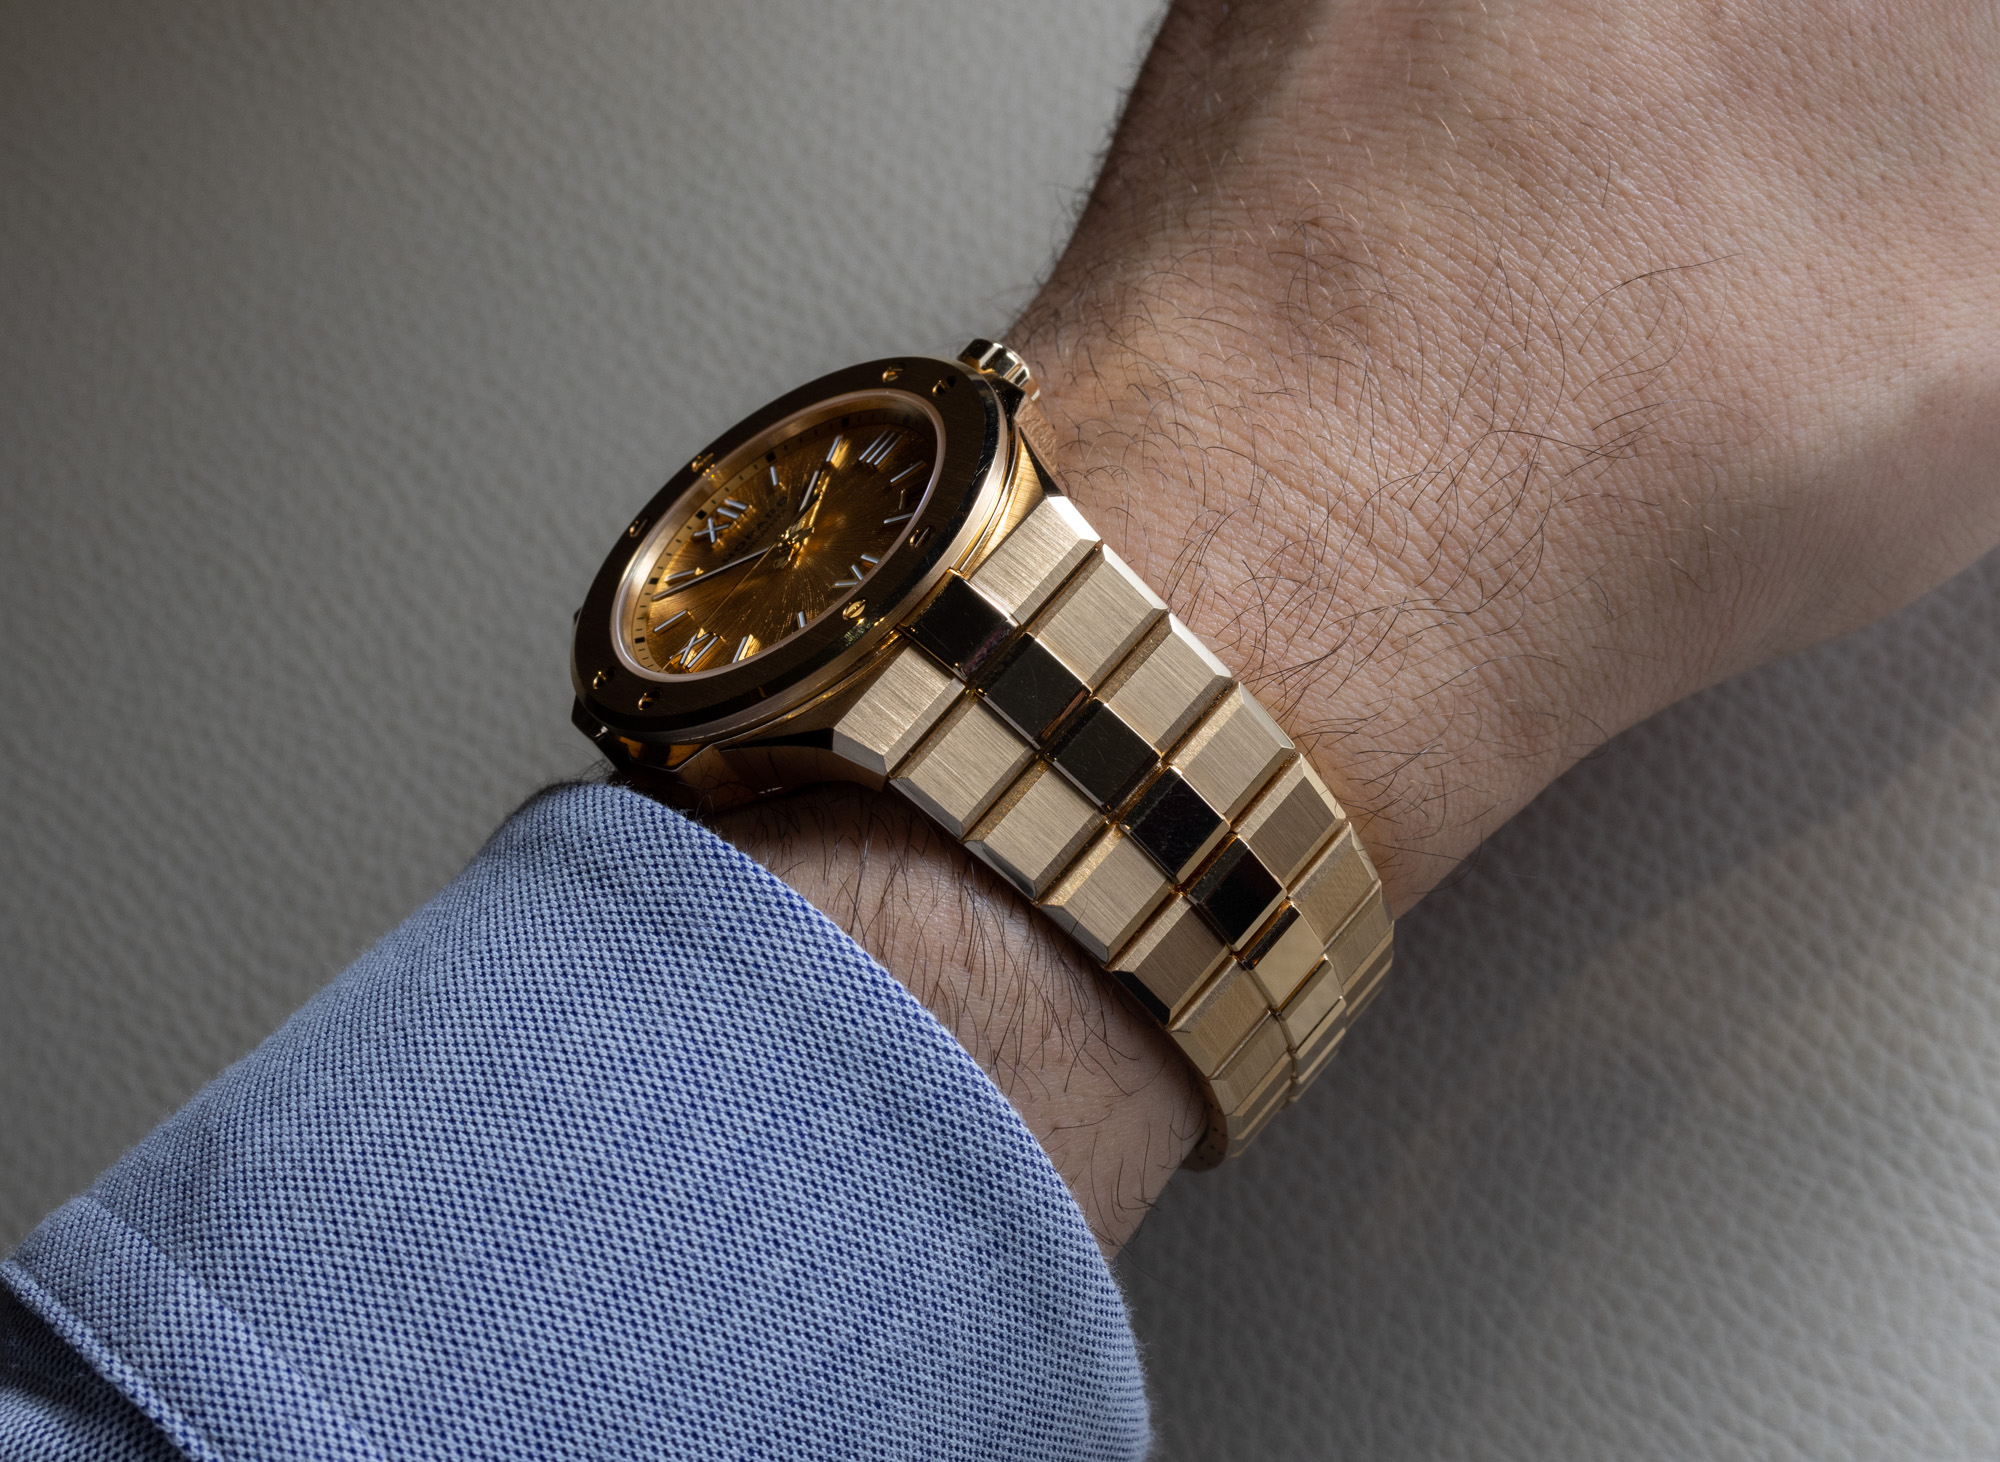 Hands On With The Chopard Alpine Eagle 41 In Ethical Rose Gold